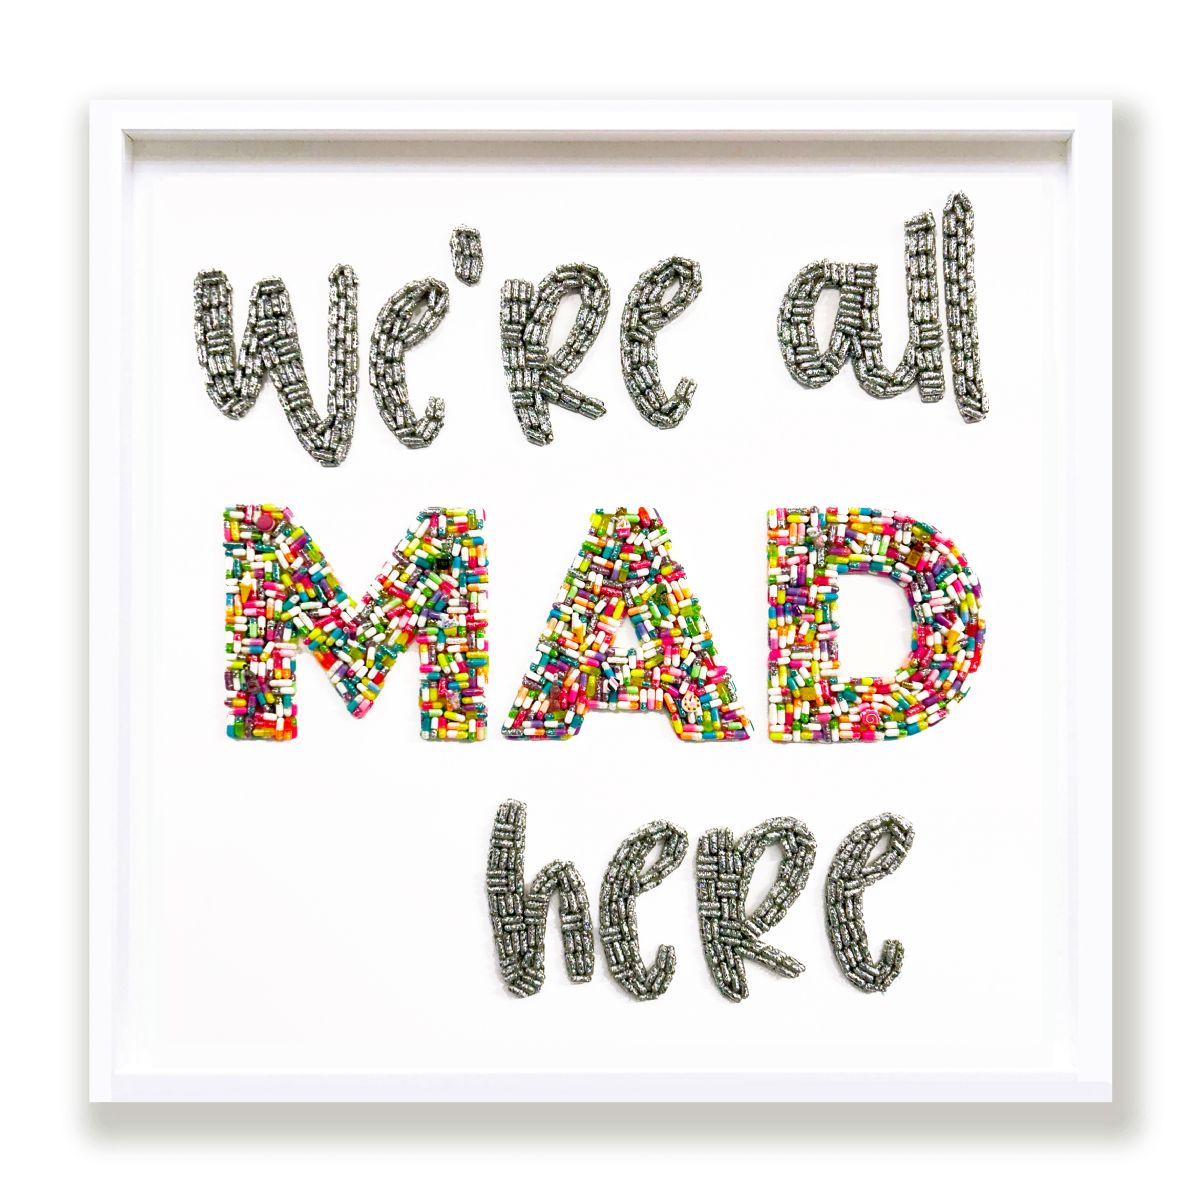 We're all Mad Here by Emma Gibbons